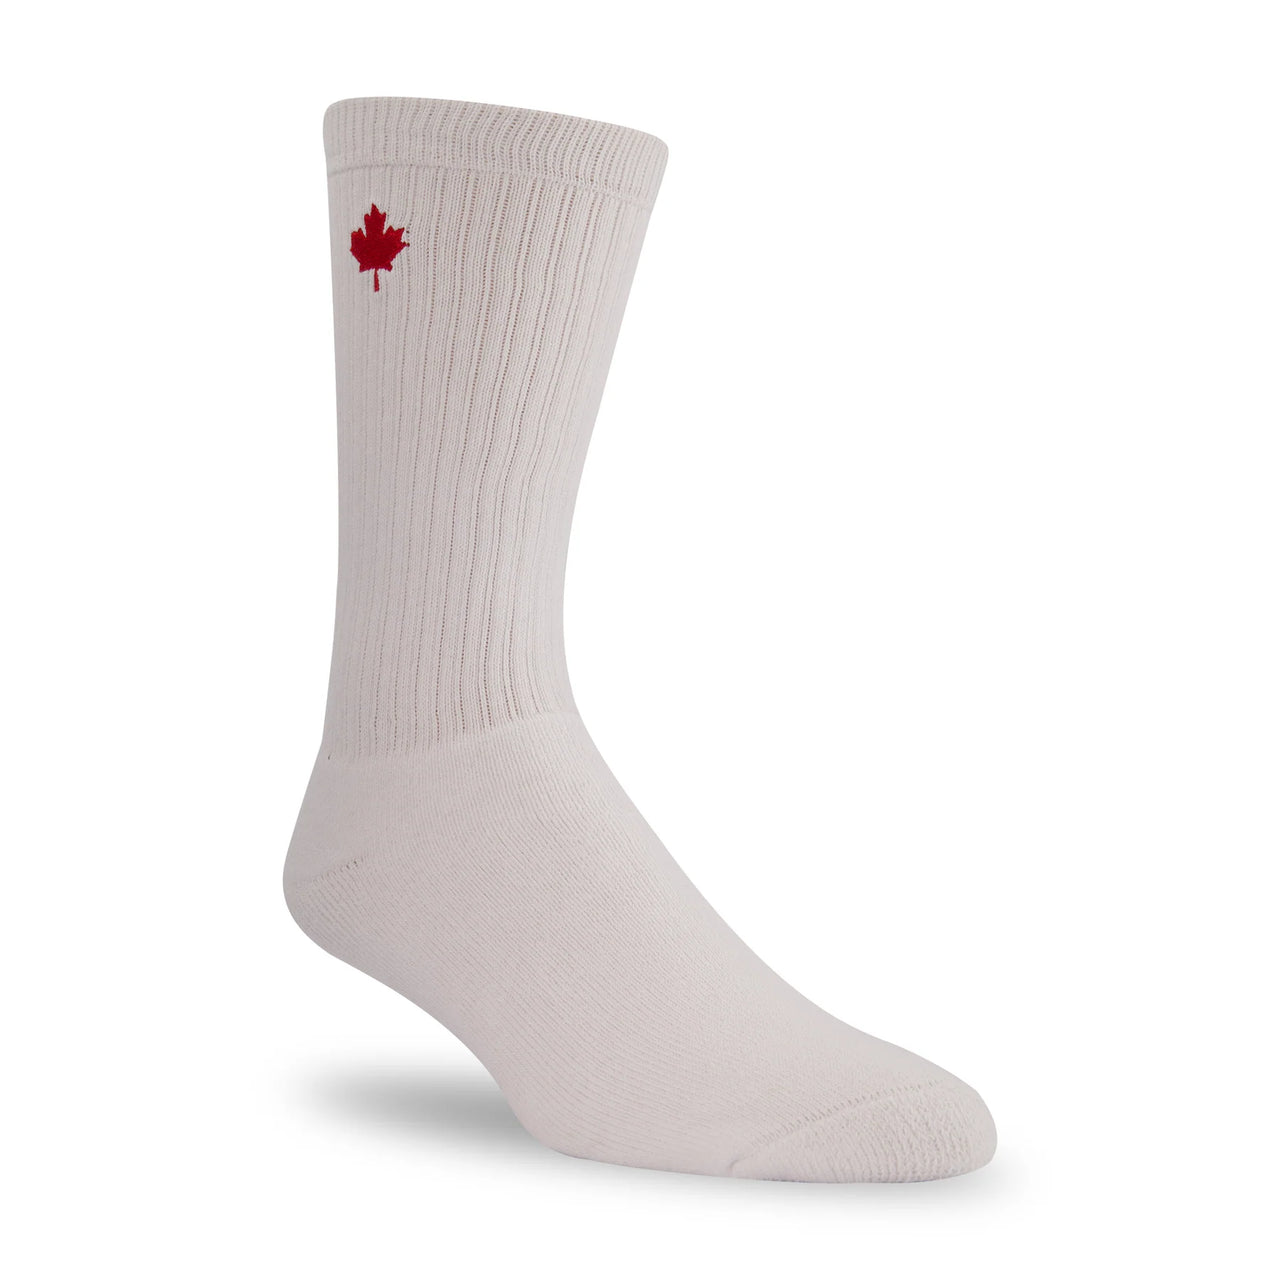 The Great Canadian Sox Men's Crew RBW Logo